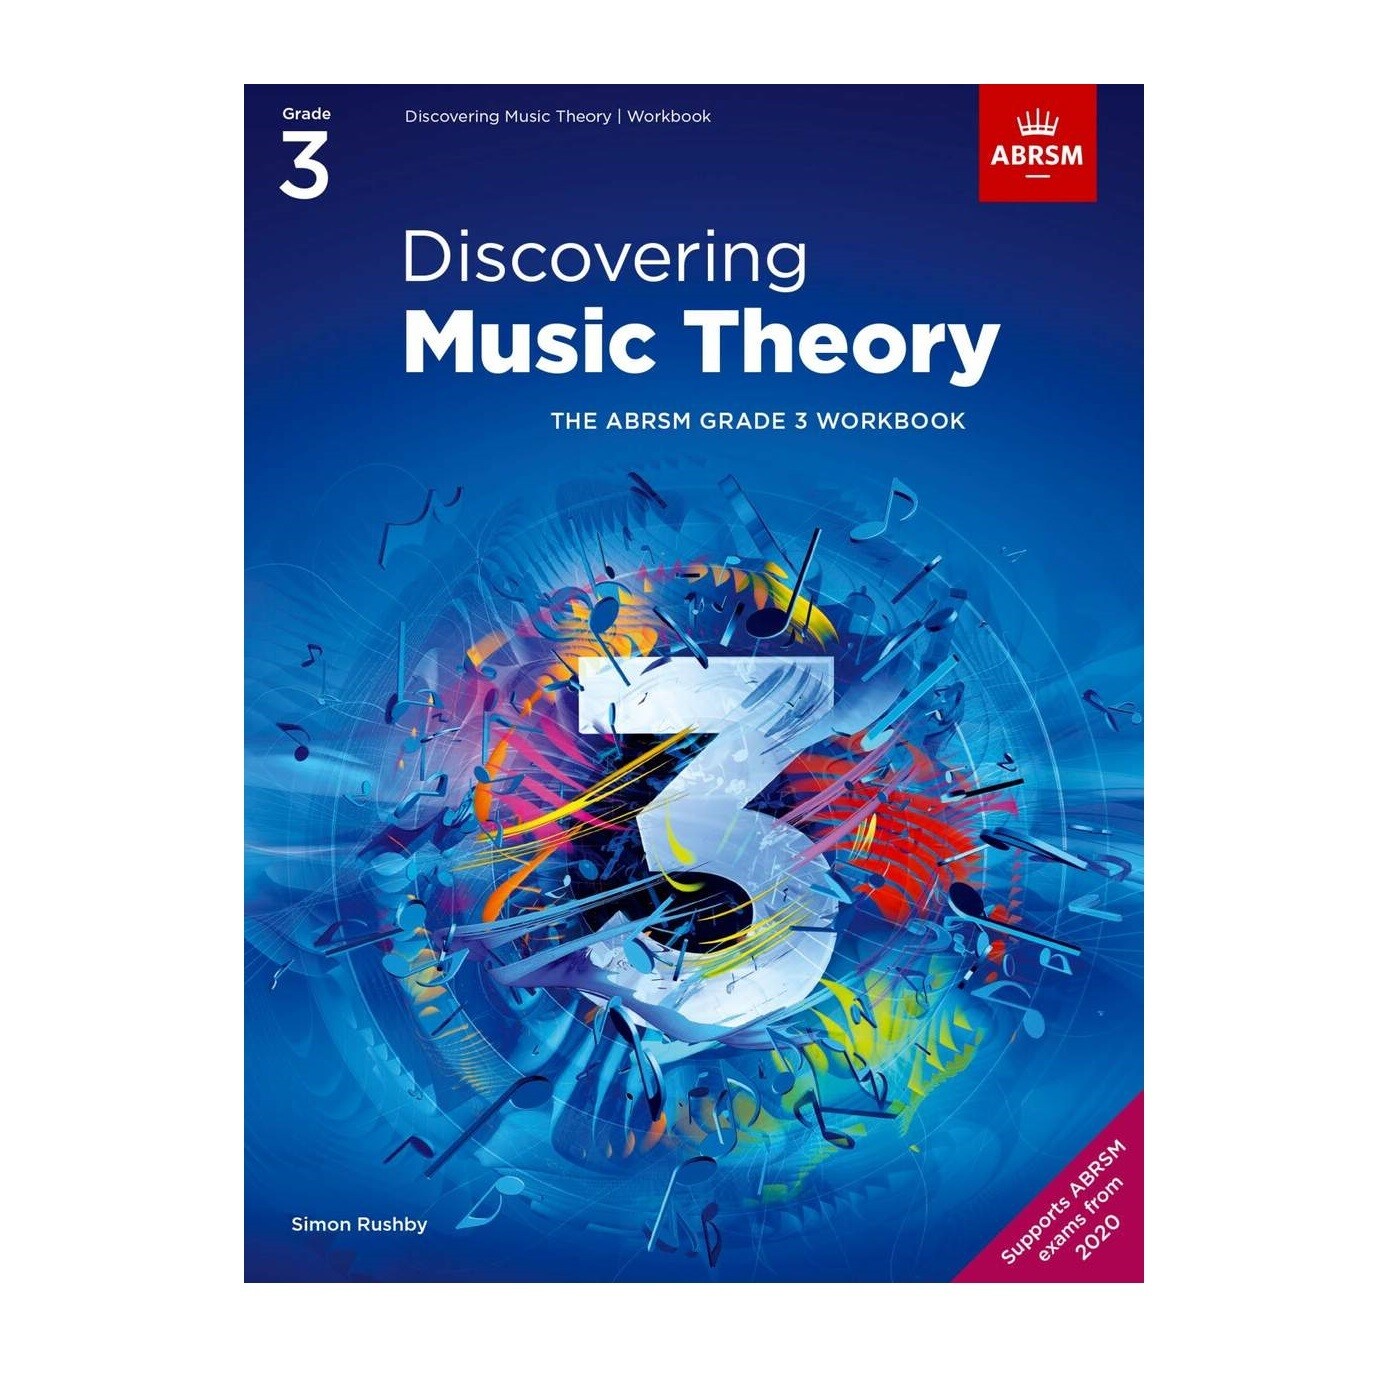 ABRSM Discovering Music Theory Book - Grade 3